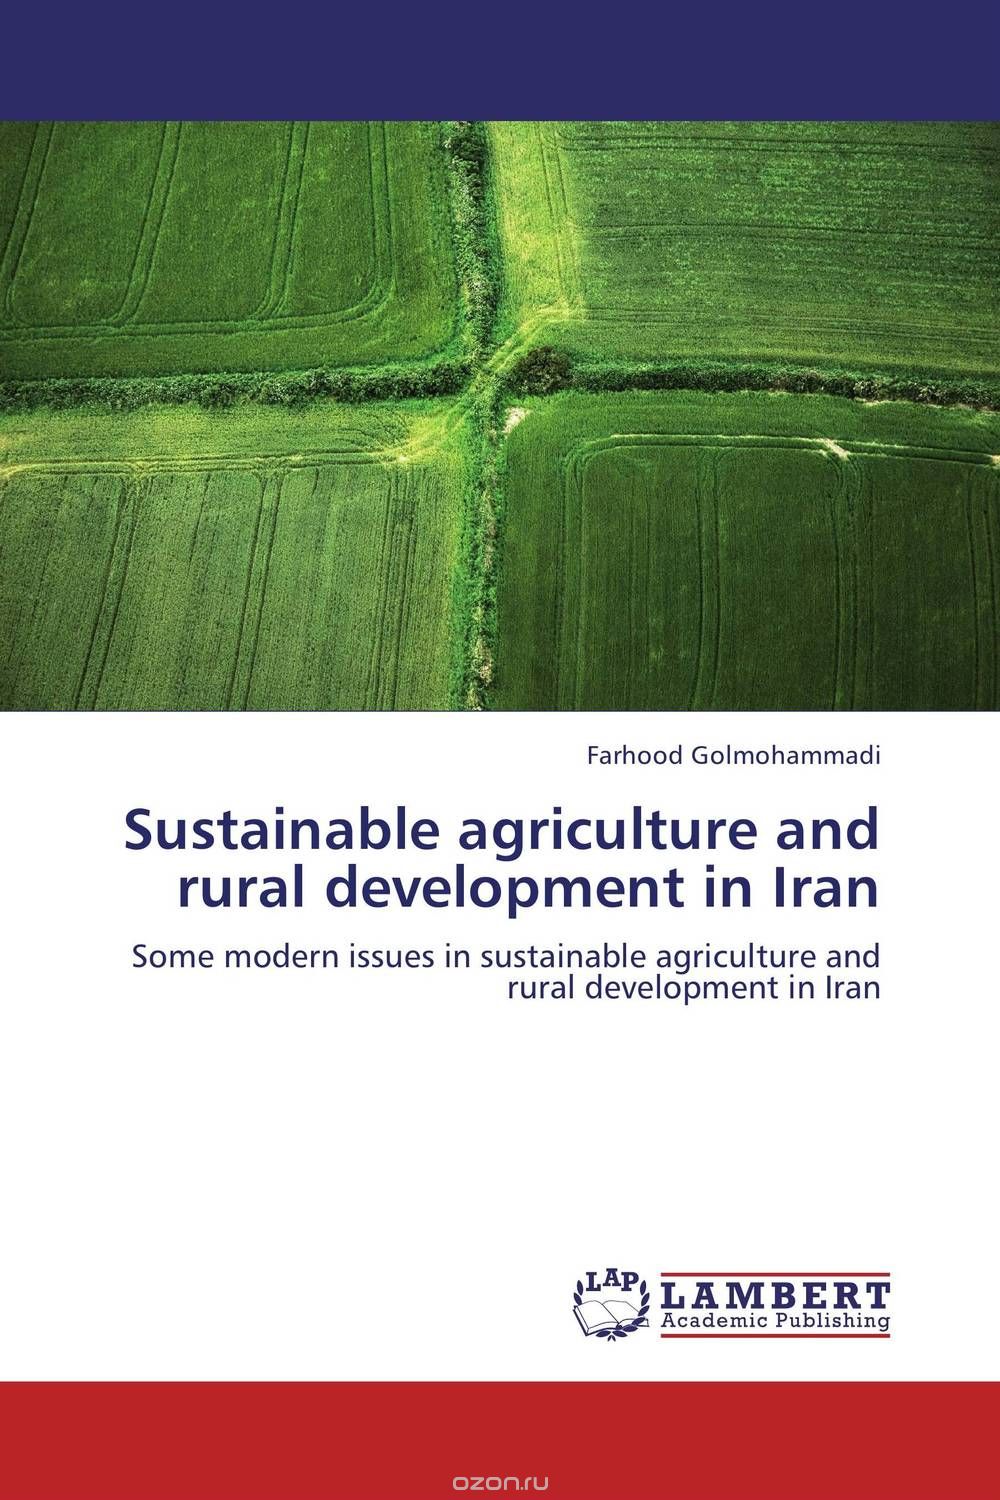 Скачать книгу "Sustainable agriculture and rural development in Iran"